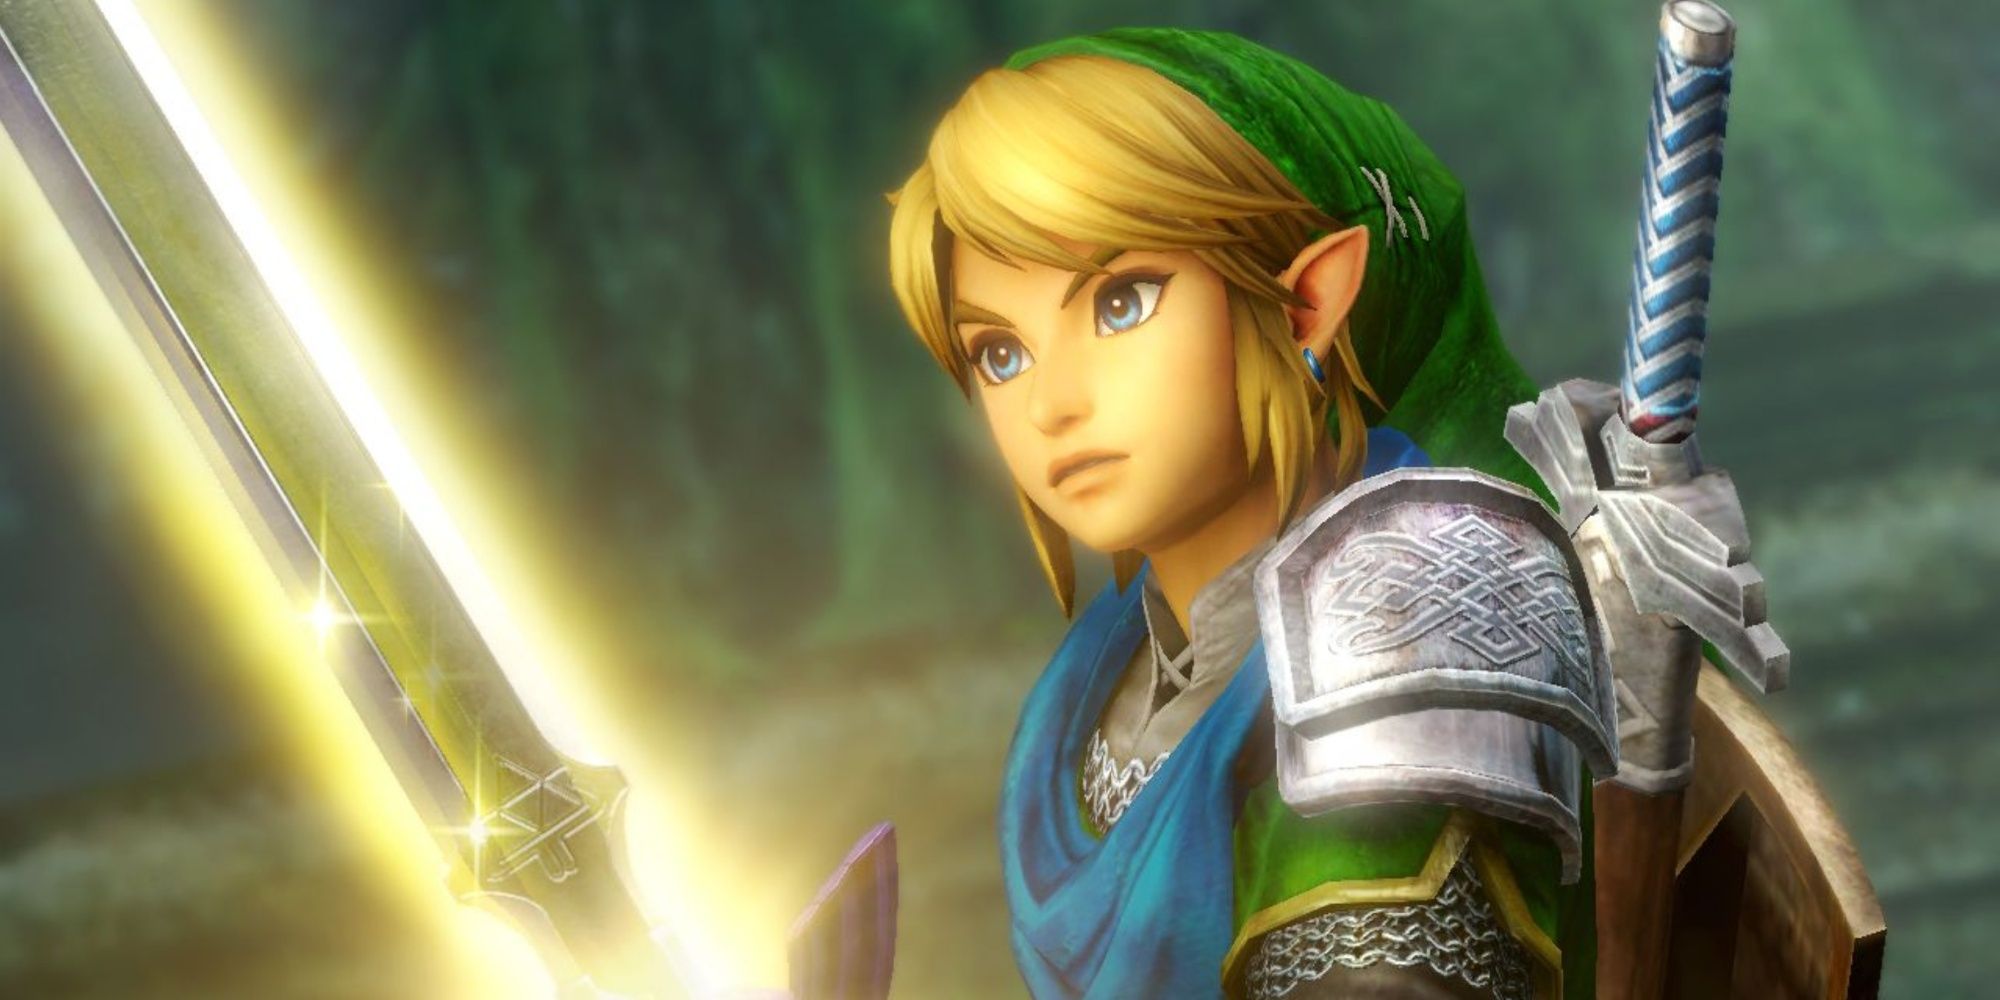 Link looking at the glowing Master Sword in Hyrule Warriors